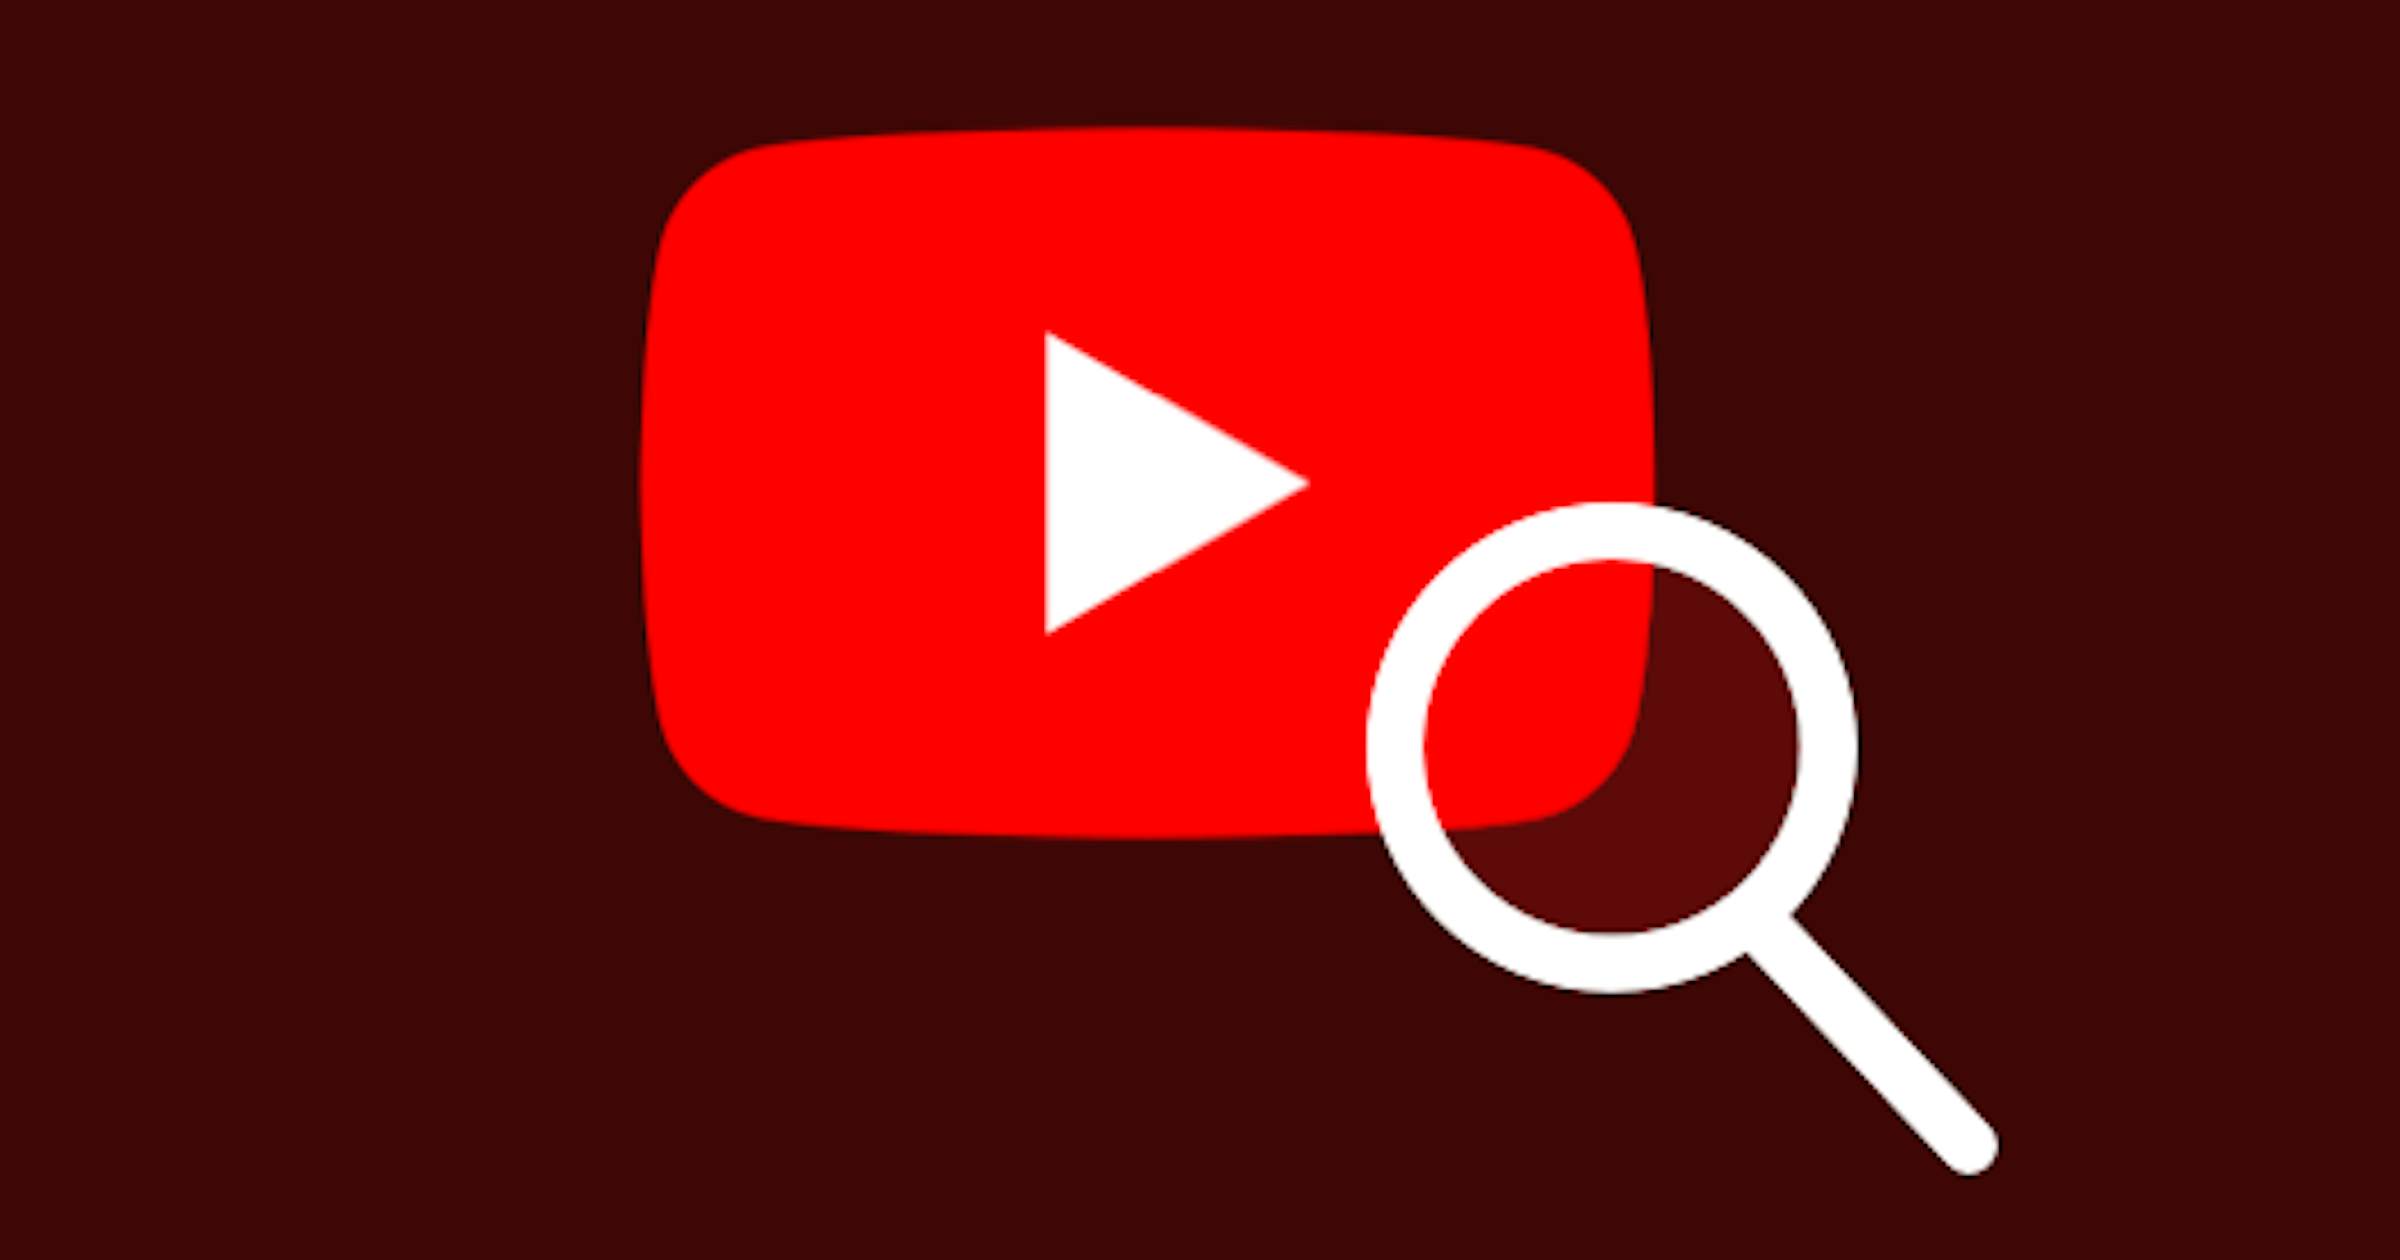 Video SEO: How to Rank on Google With Your Videos